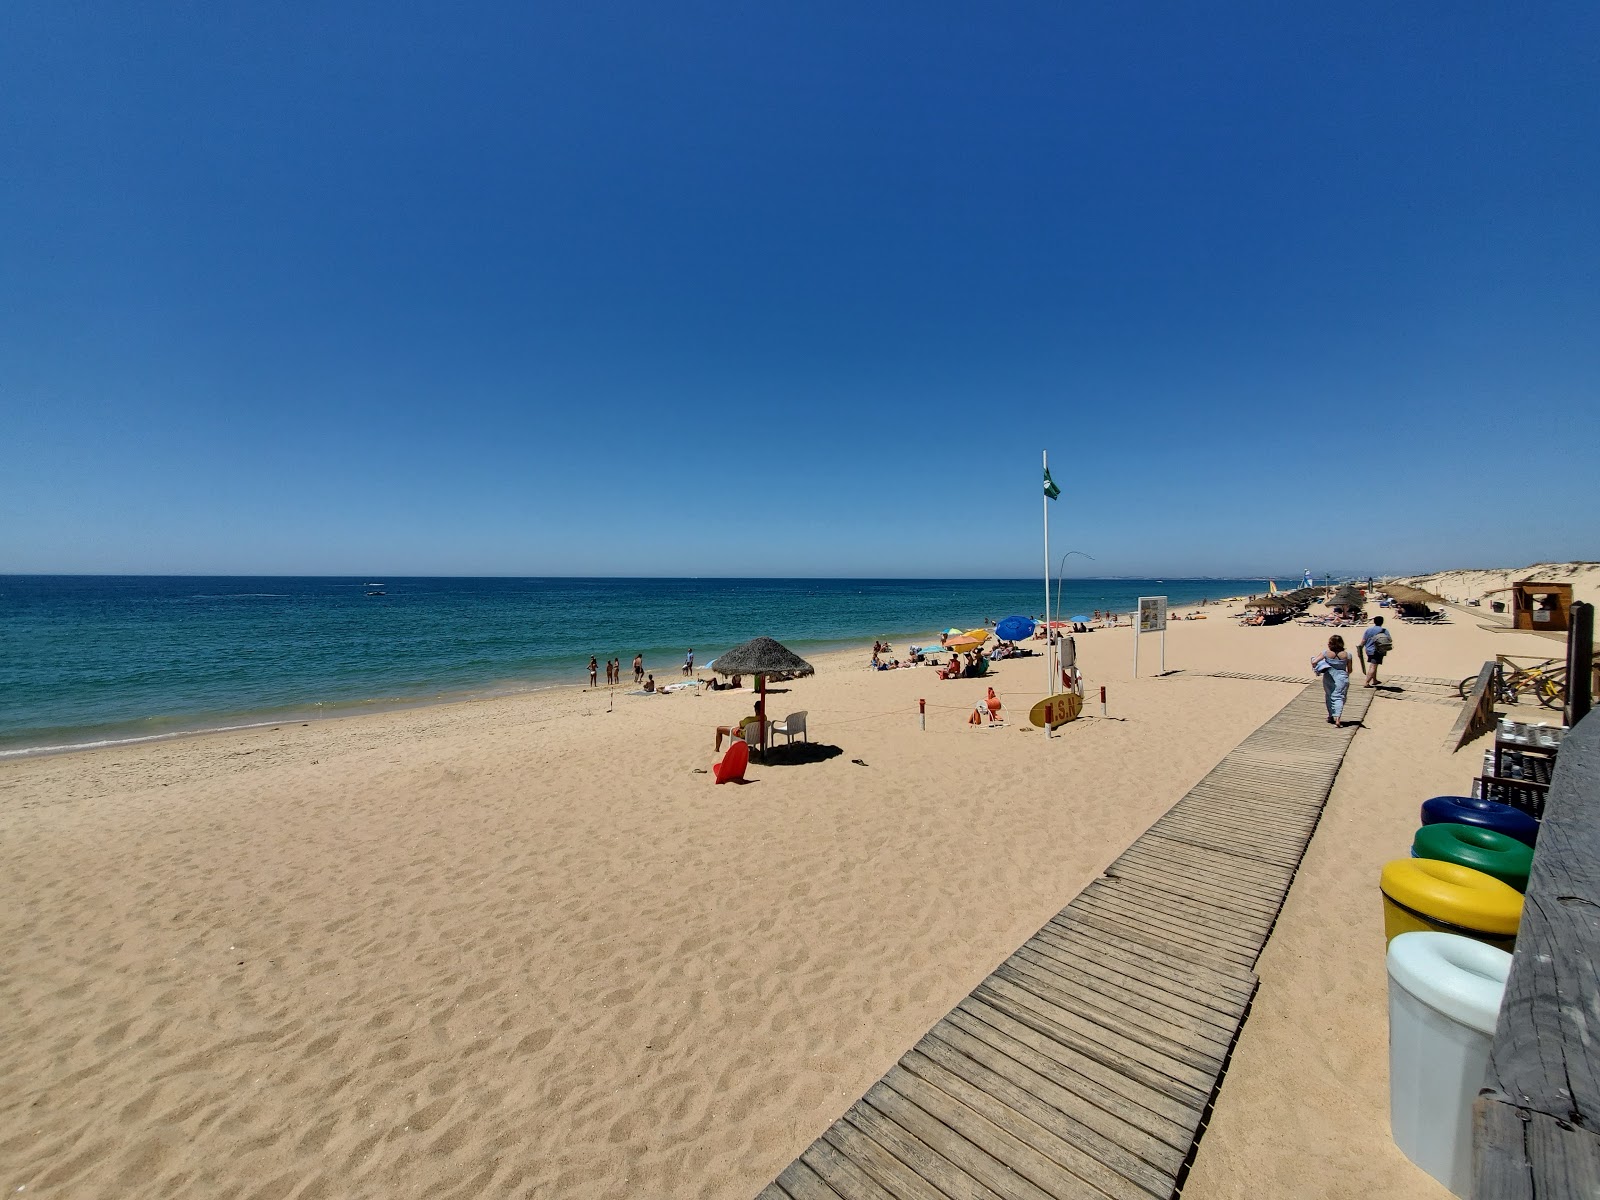 Photo of Quinta do Lago beach - popular place among relax connoisseurs